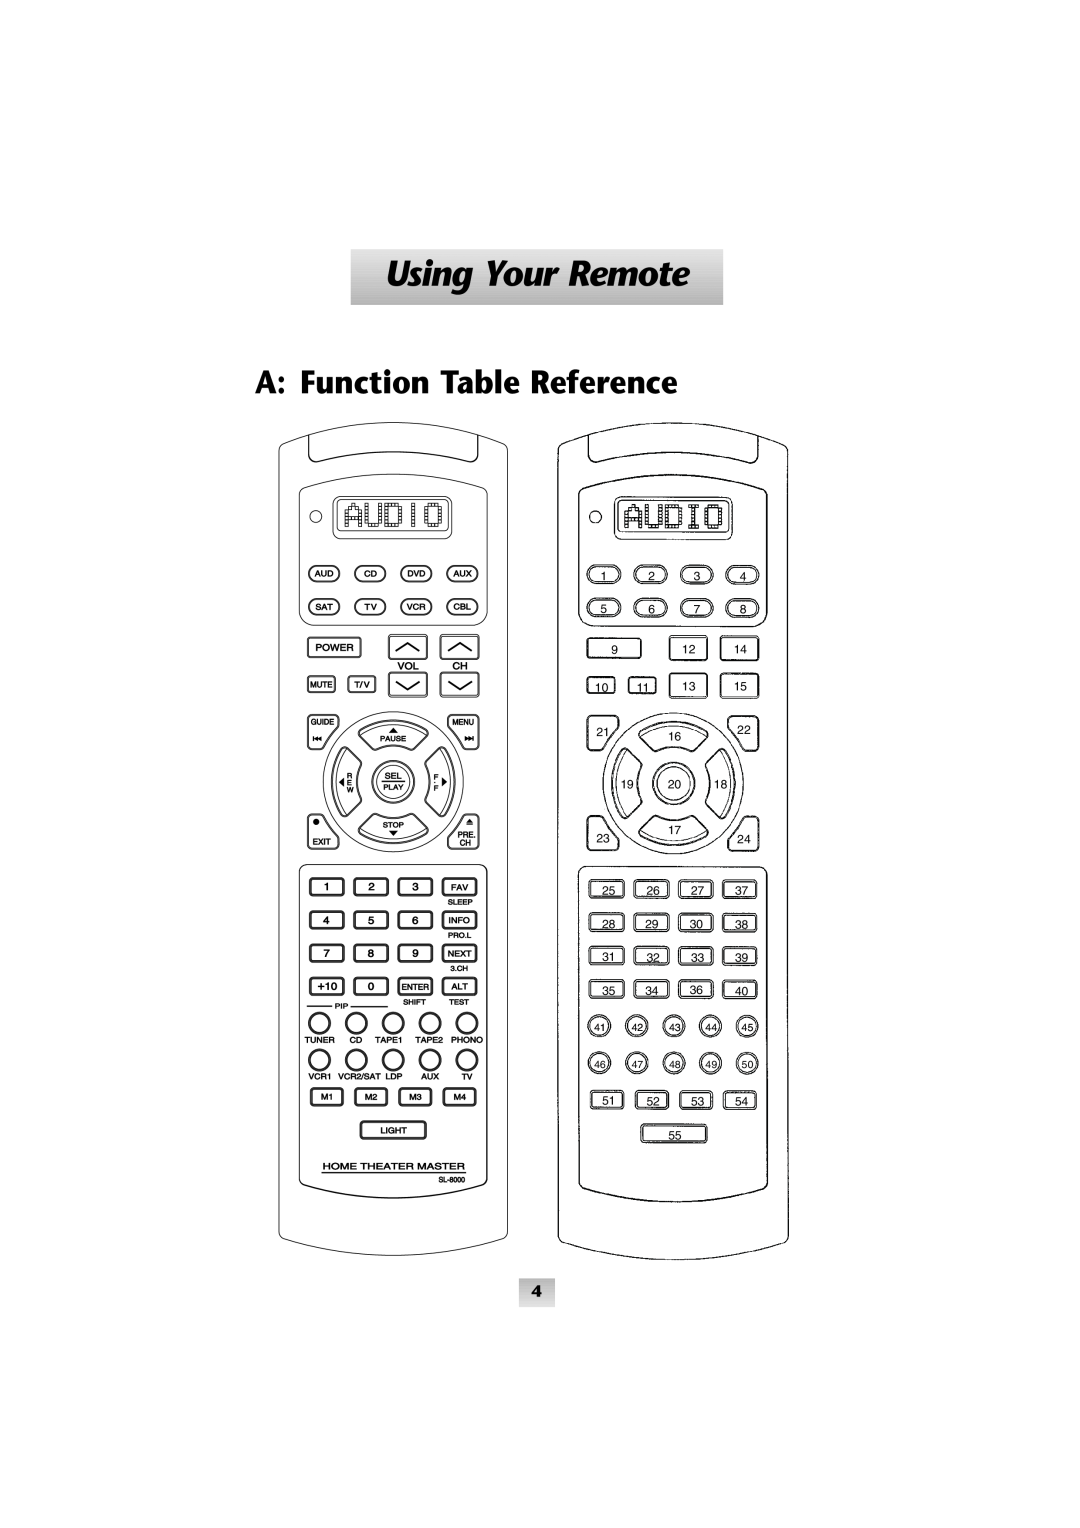 Universal Remote Control SL-8000 Using Your Remote, A Function Table Reference, 1 2 3 5 6 7, 10 11 13 211622 19 20, Power 